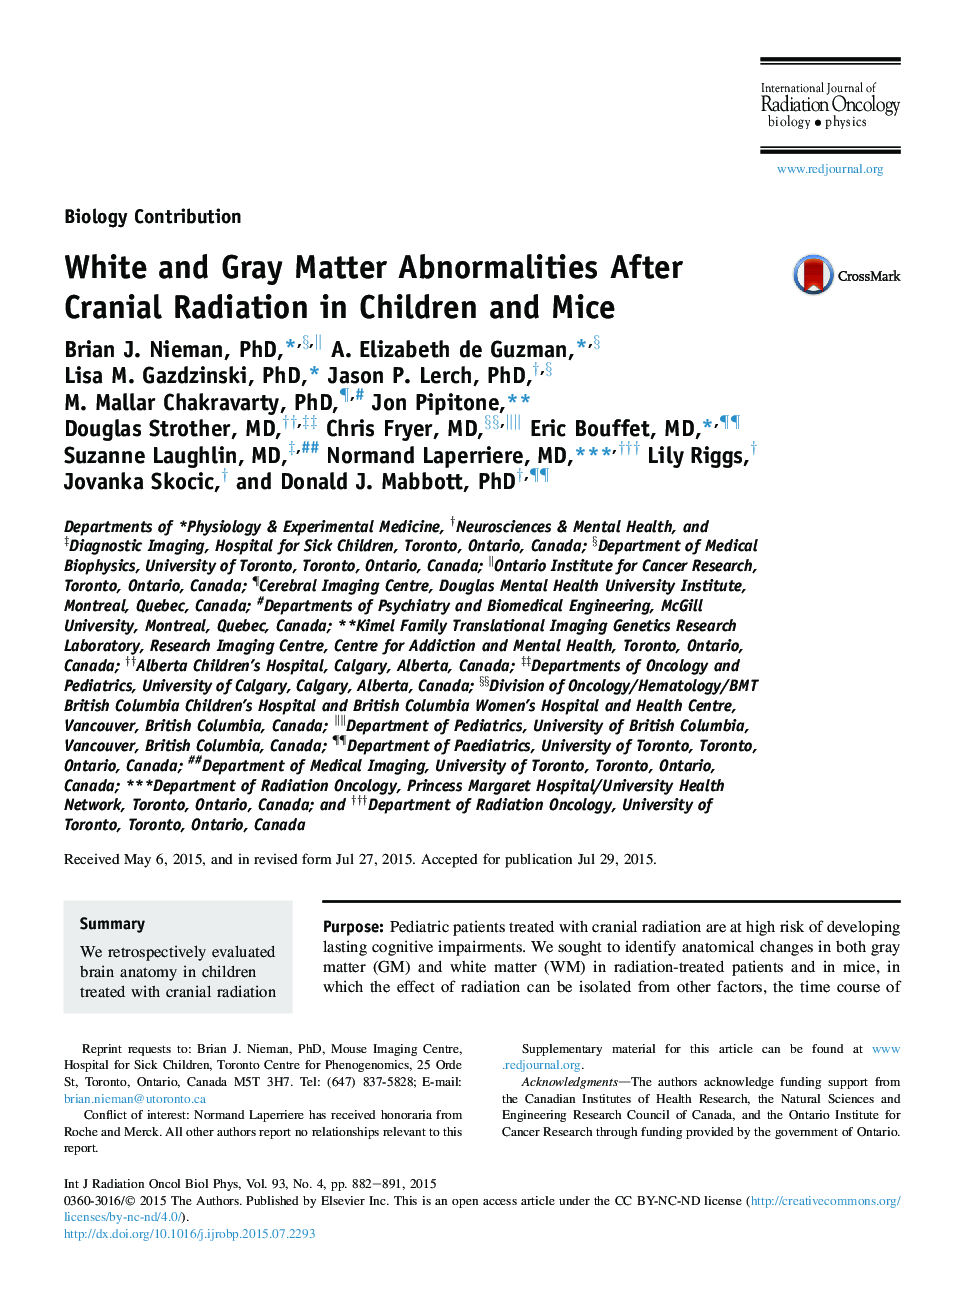 White and Gray Matter Abnormalities After Cranial Radiation in Children and Mice